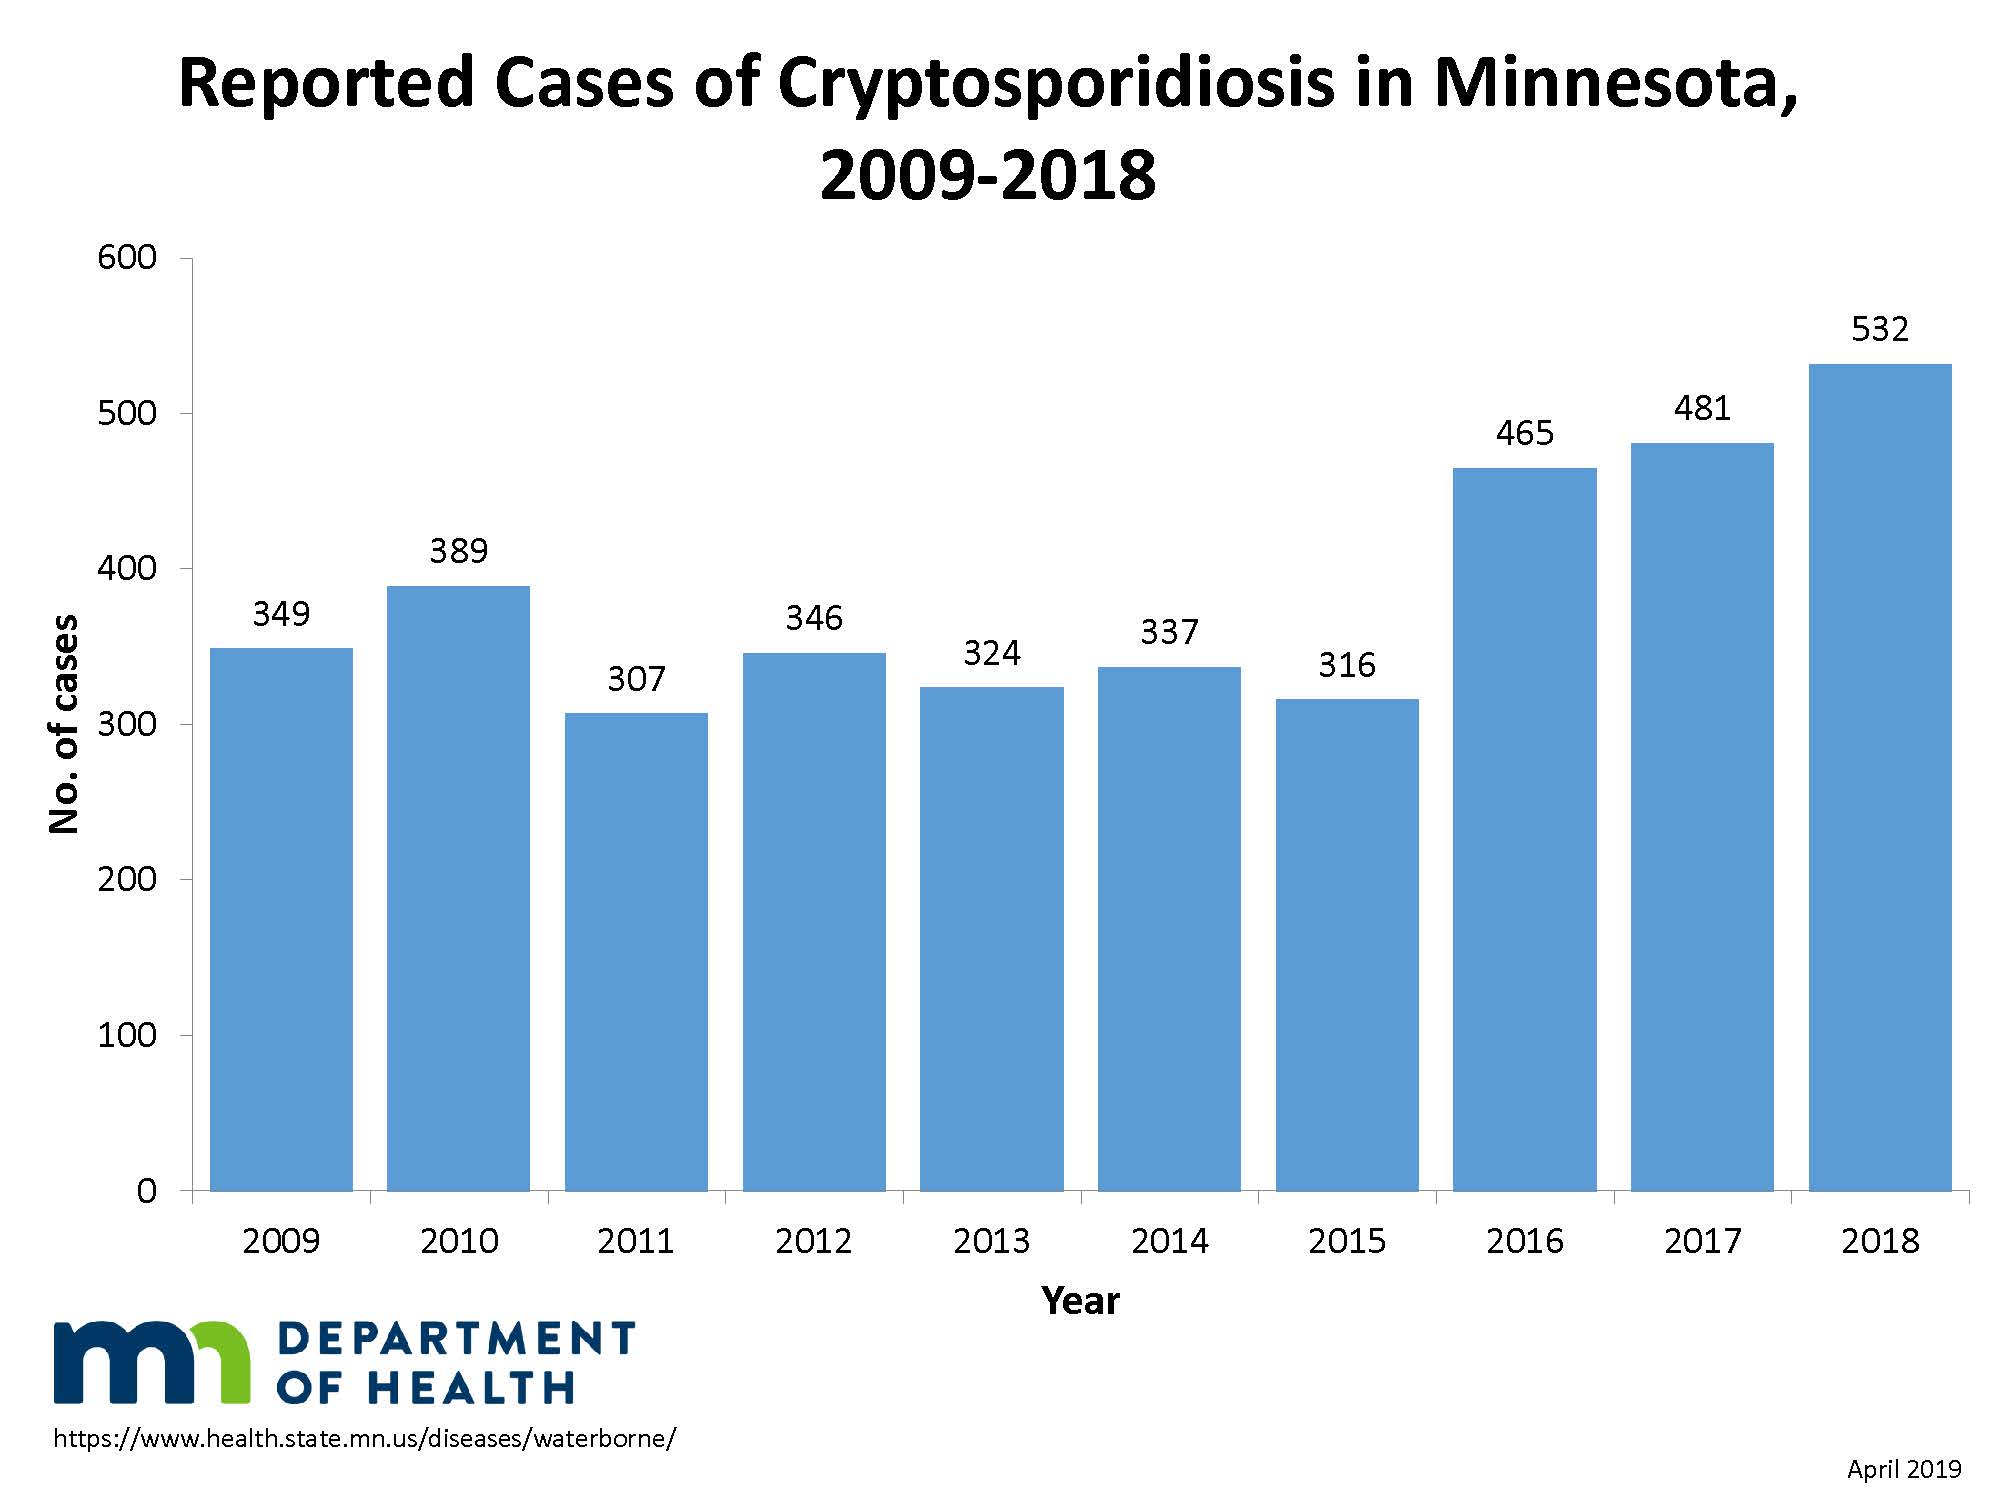 Reported crypto cases in Minnesota, 2009-2018